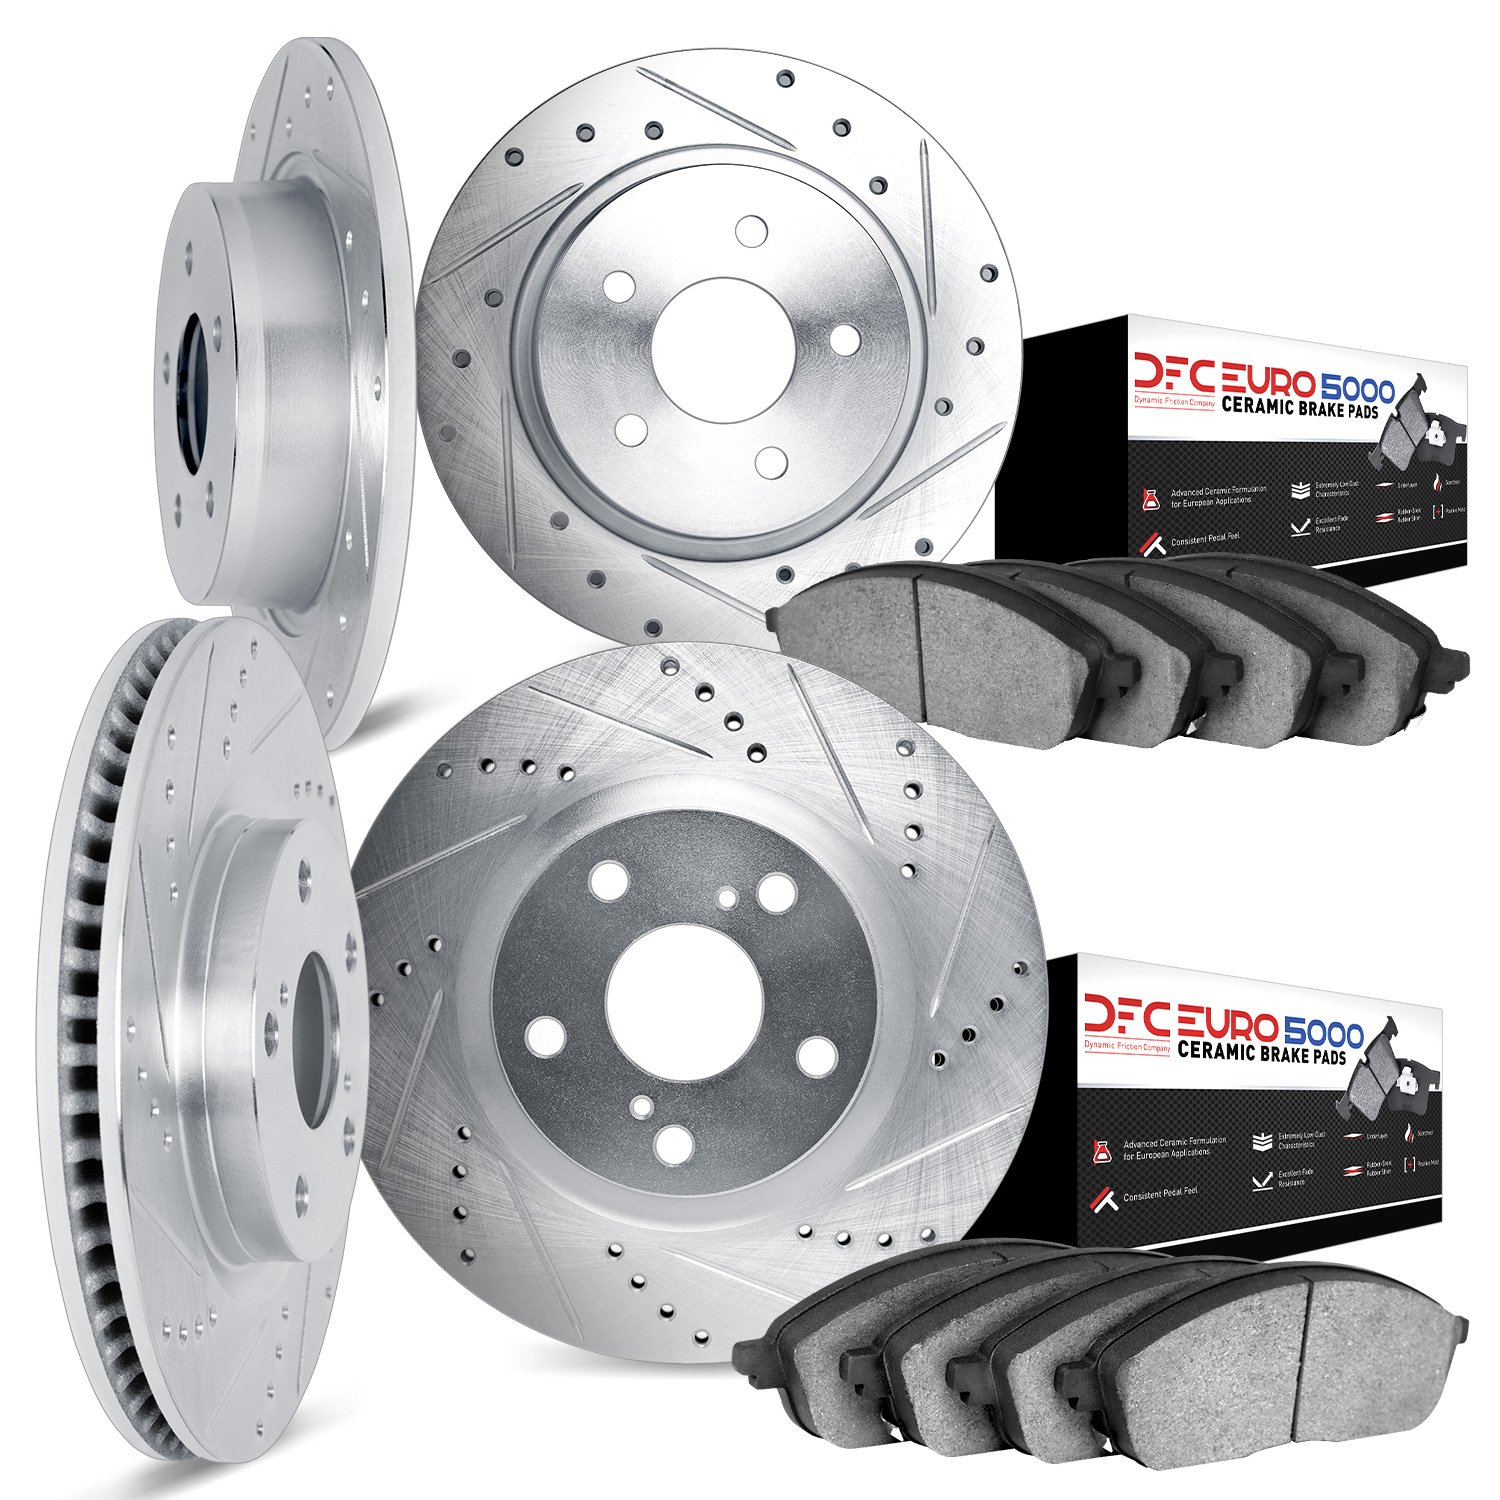 7604-63015 Drilled/Slotted Brake Rotors w/5000 Euro Ceramic Brake Pads Kit [Silver], 2001-2009 Mercedes-Benz, Position: Front an